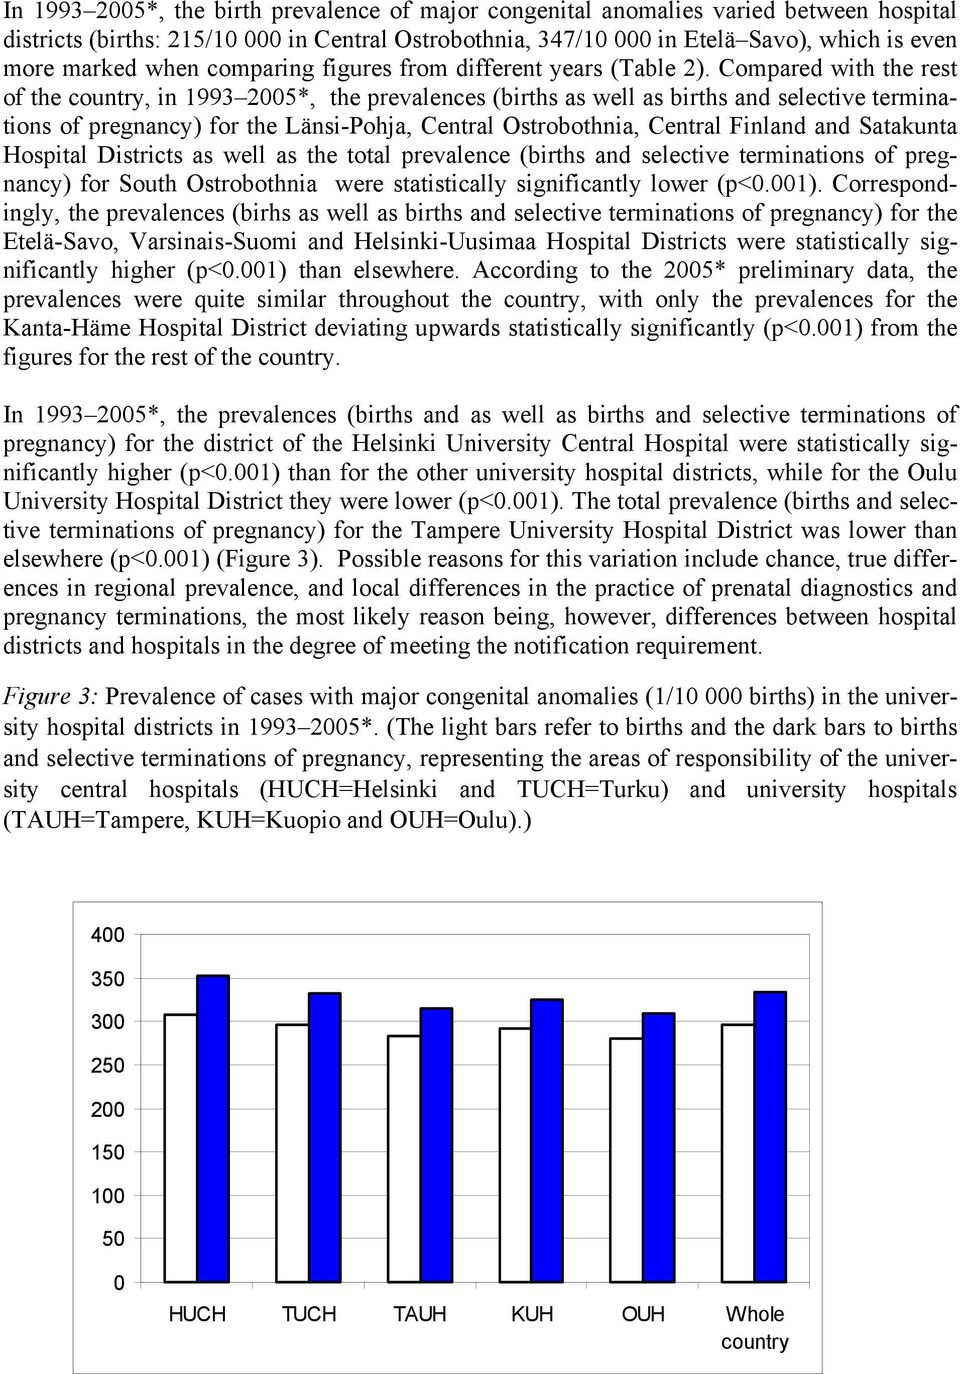 Compared with the rest of the country, in 1993 25*, the prevalences (births as well as births and selective terminations of pregnancy) for the Länsi-Pohja, Central Ostrobothnia, Central Finland and